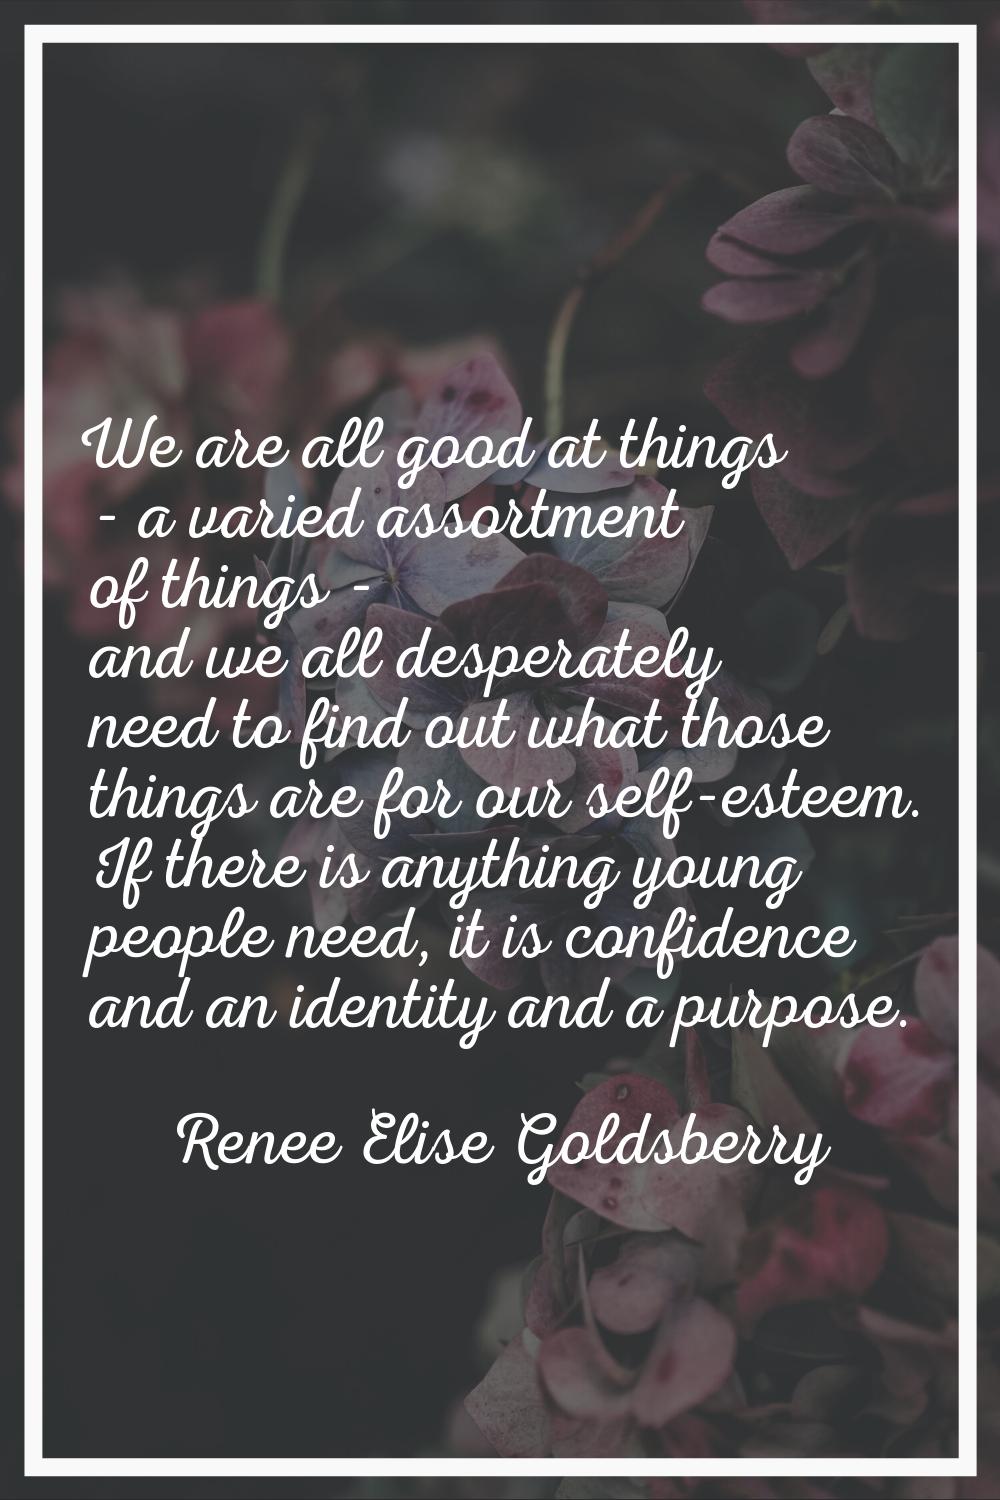 We are all good at things - a varied assortment of things - and we all desperately need to find out